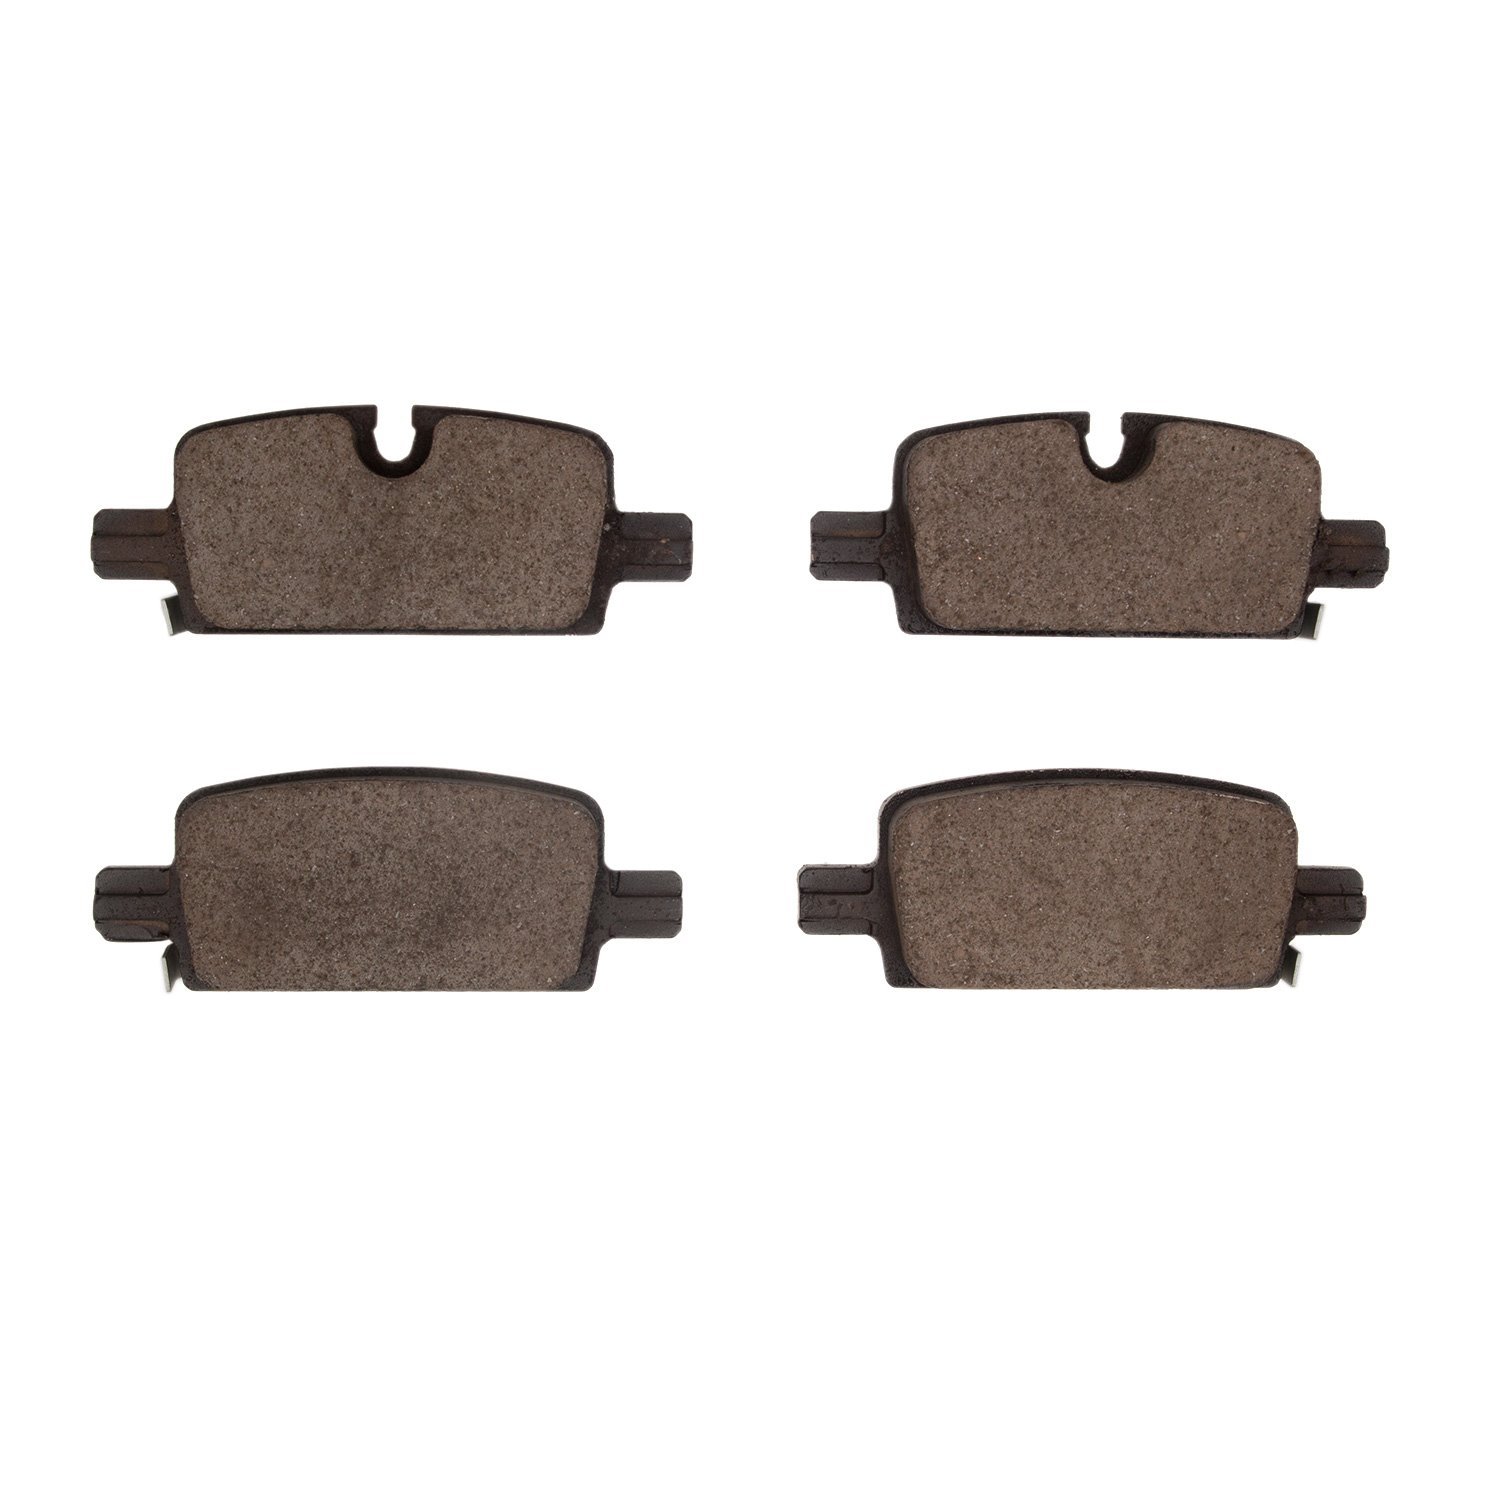 Optimum OE Brake Pads, Fits Select Fits Multiple Makes/Models, Position: Rear Right